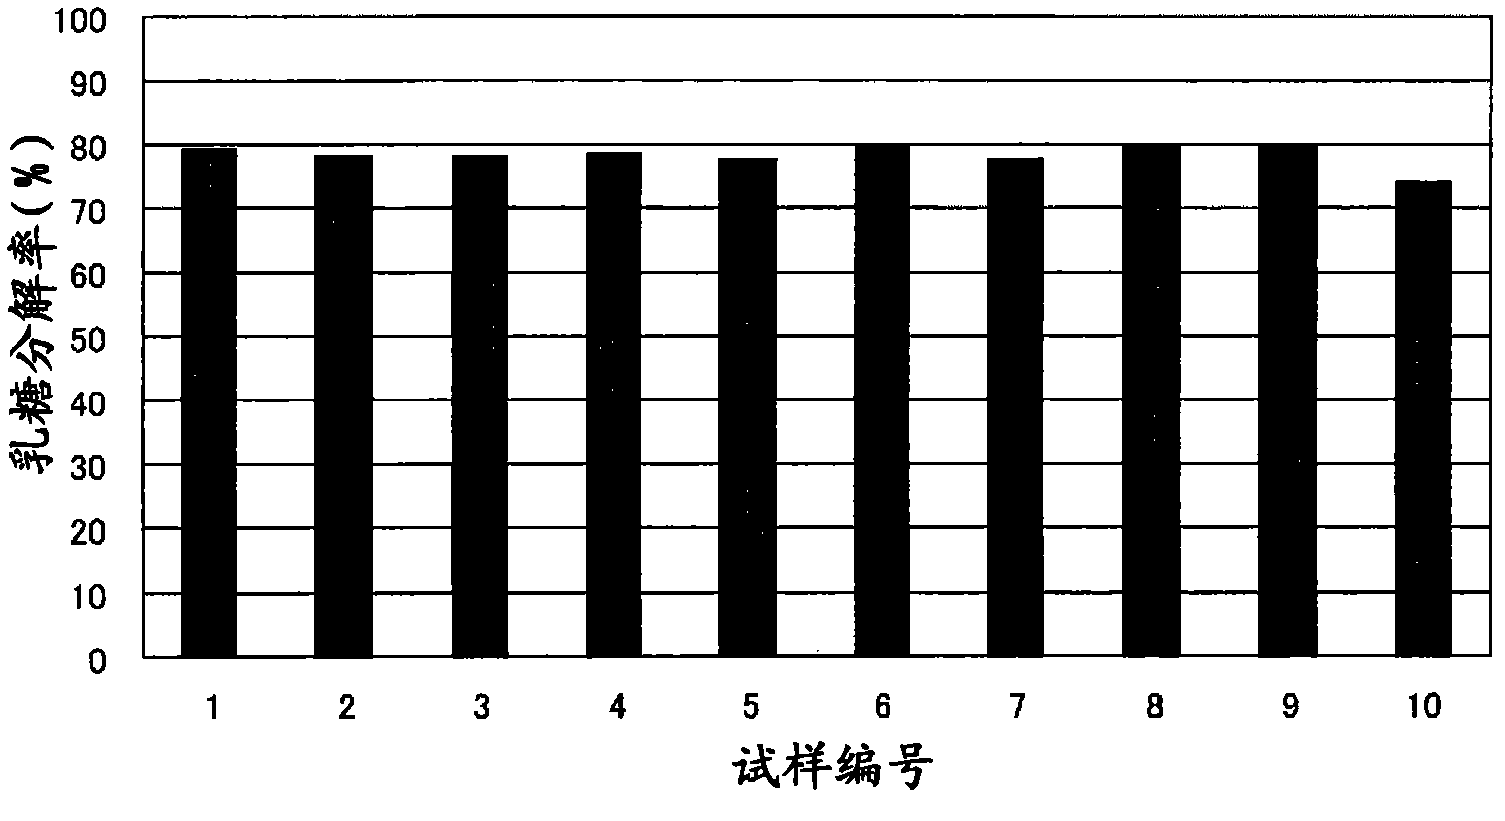 Cultured milk with low lactose content and method for manufacturing same